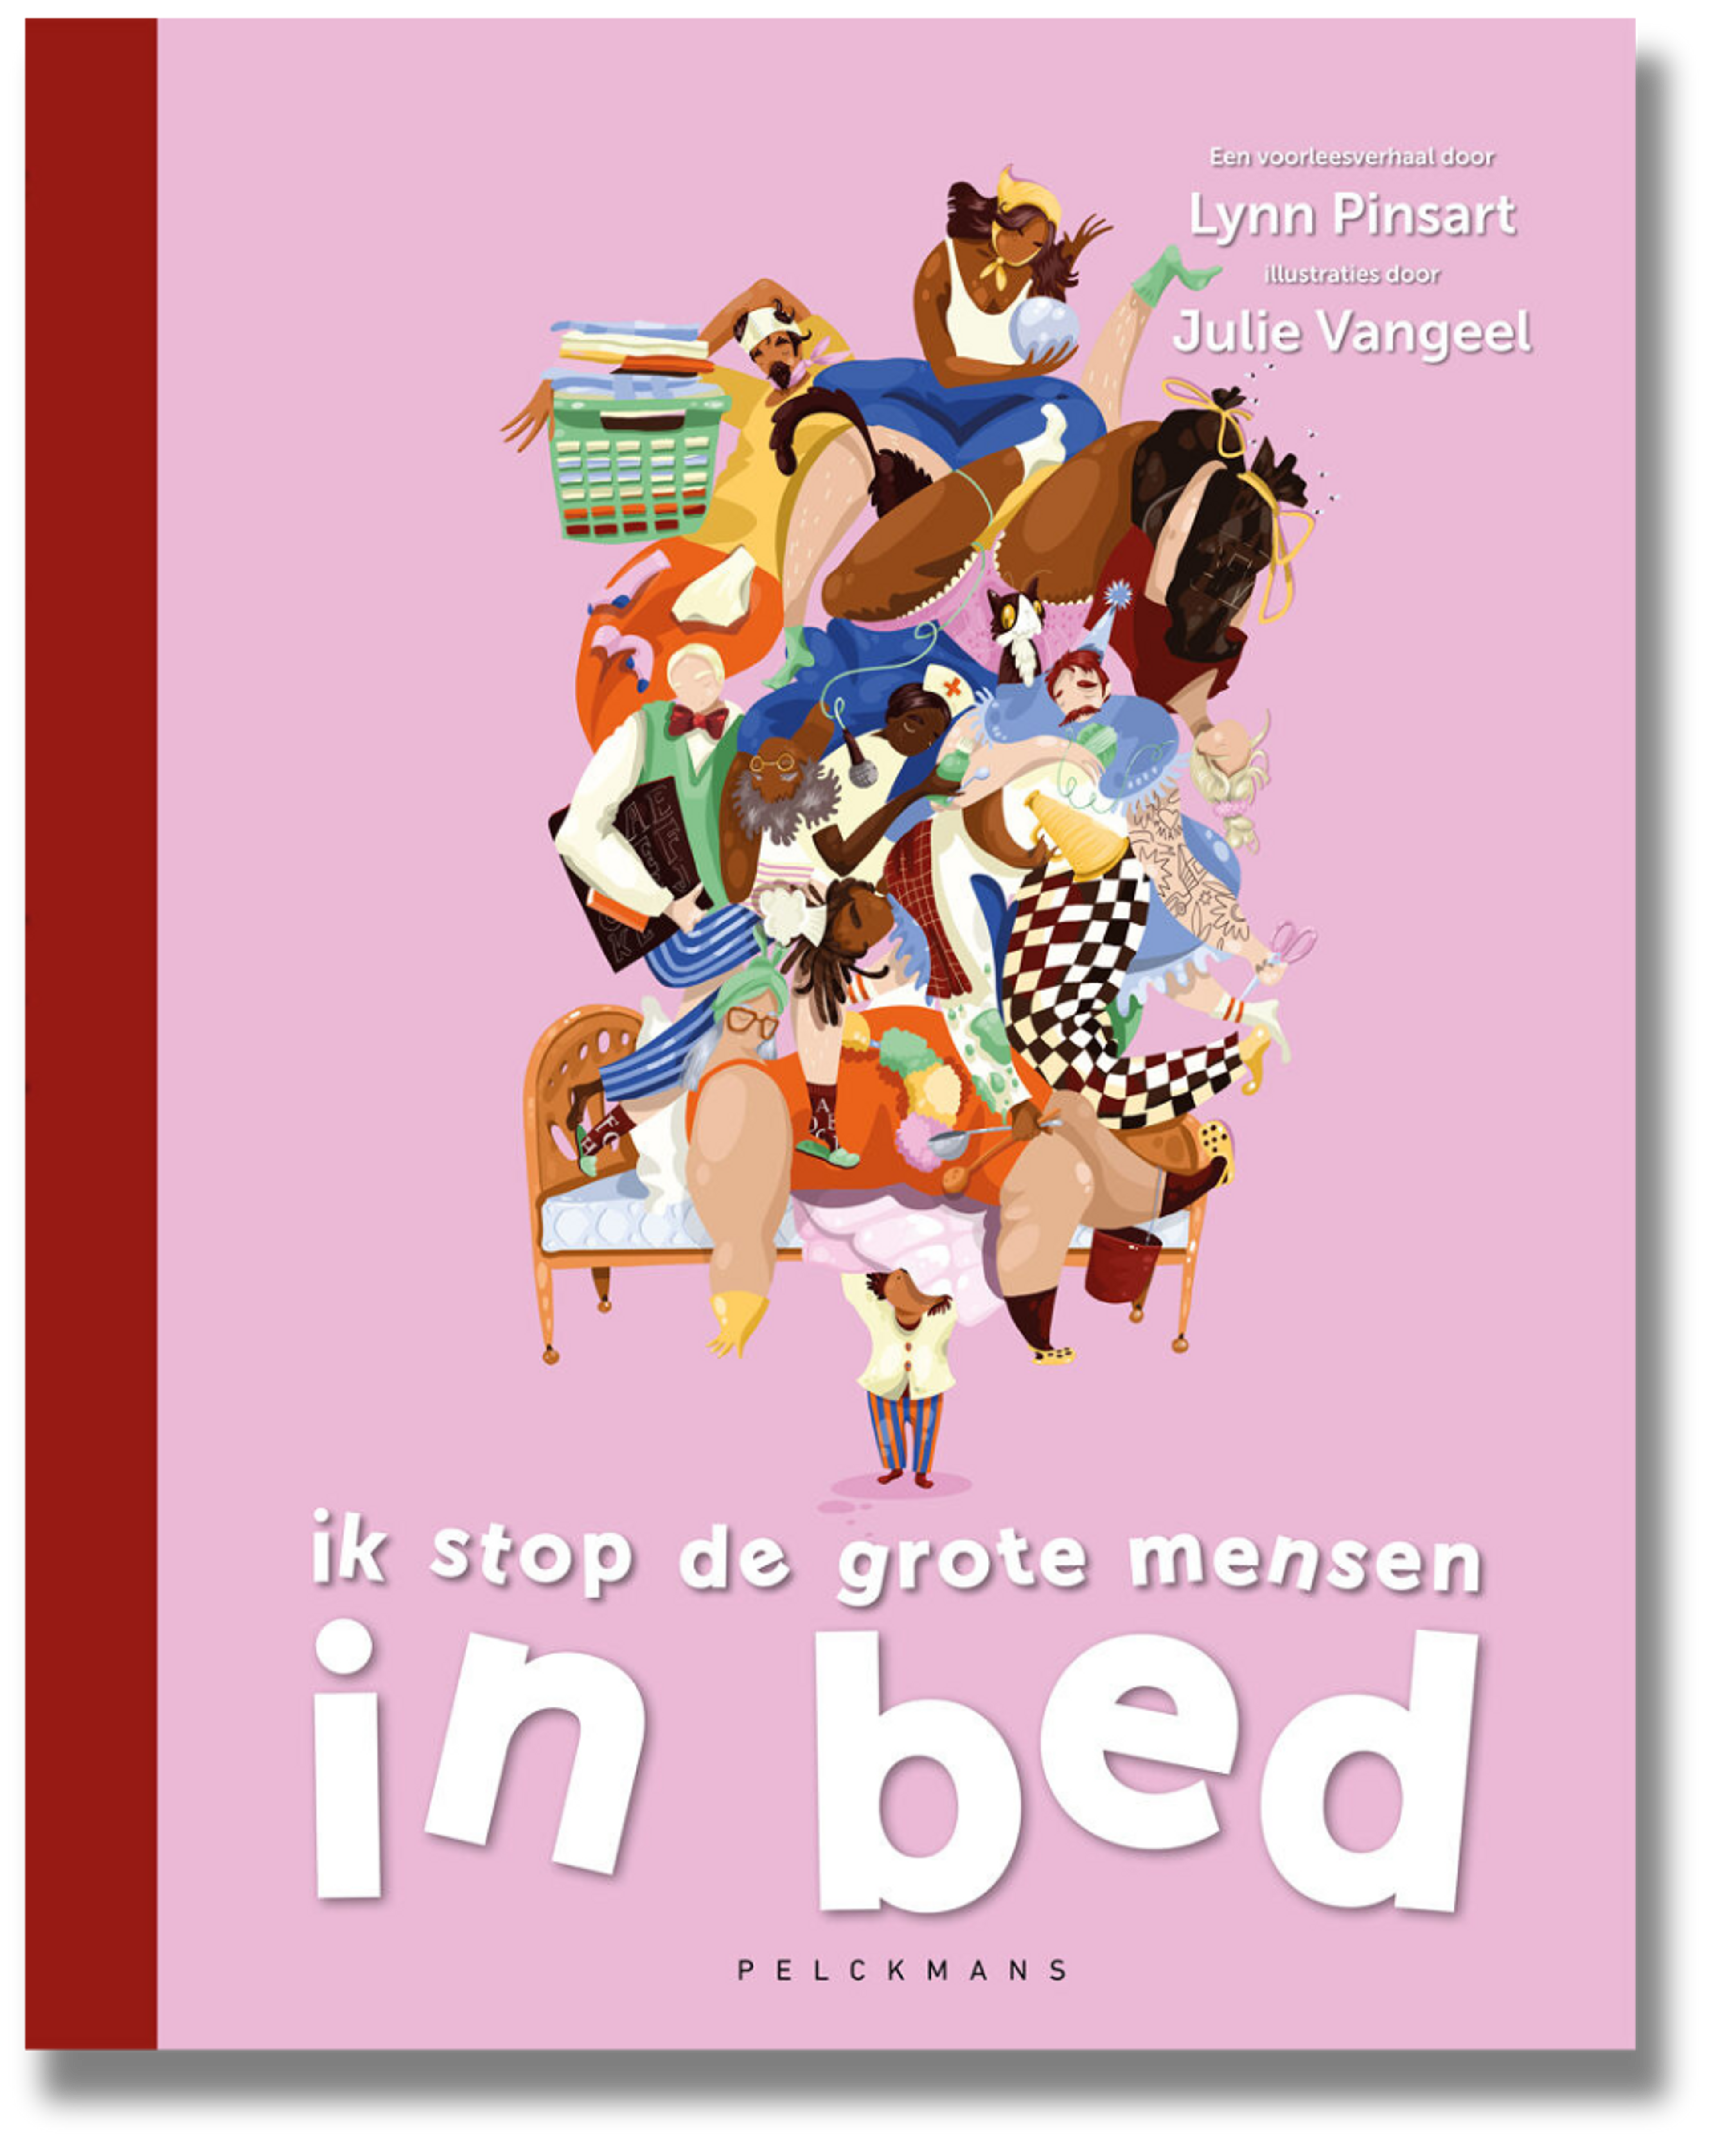 Cover for Bedtime for adults